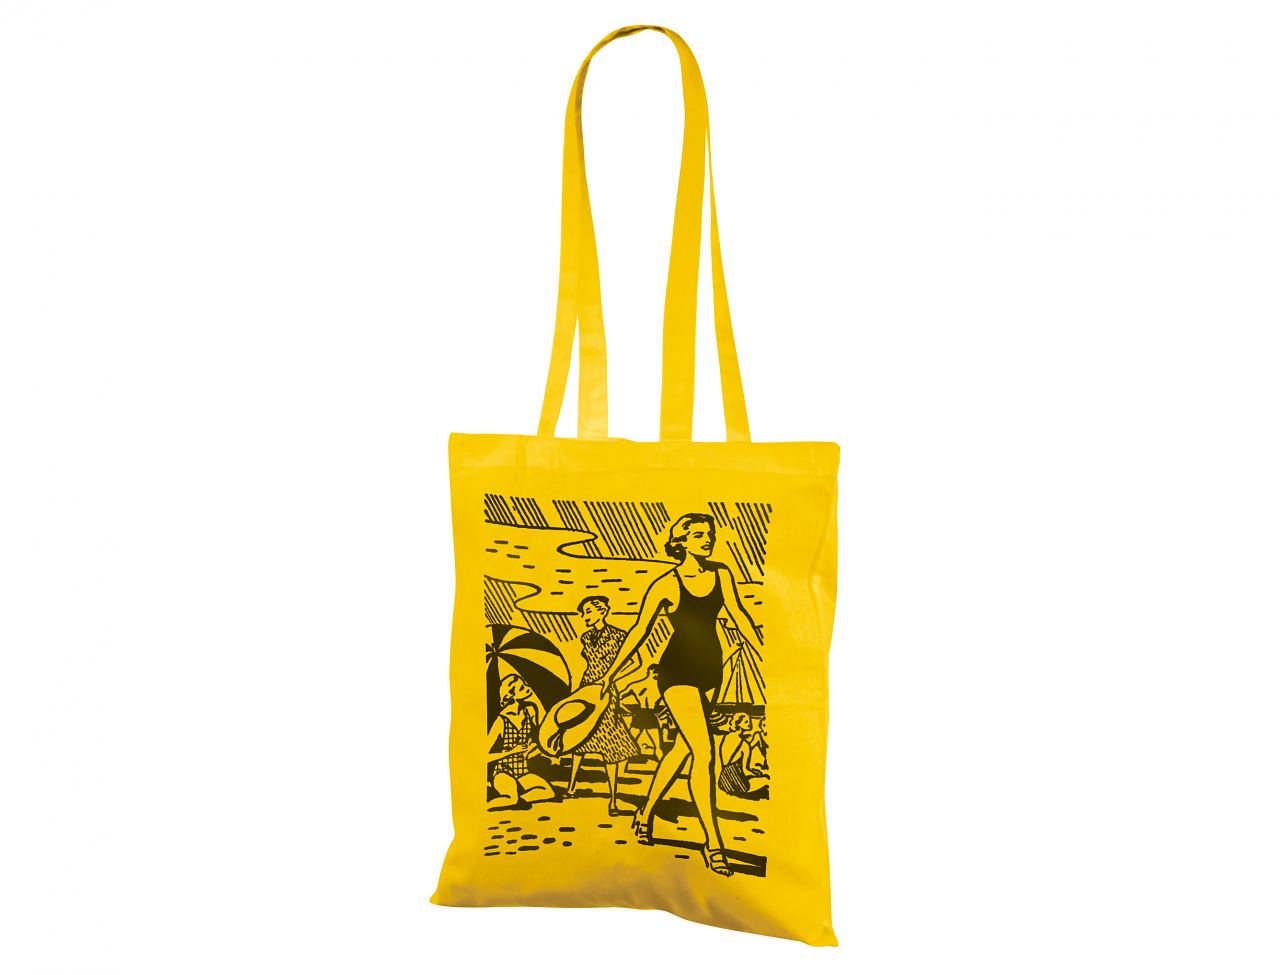 We offer economical yellow cotton tote bag with personal print